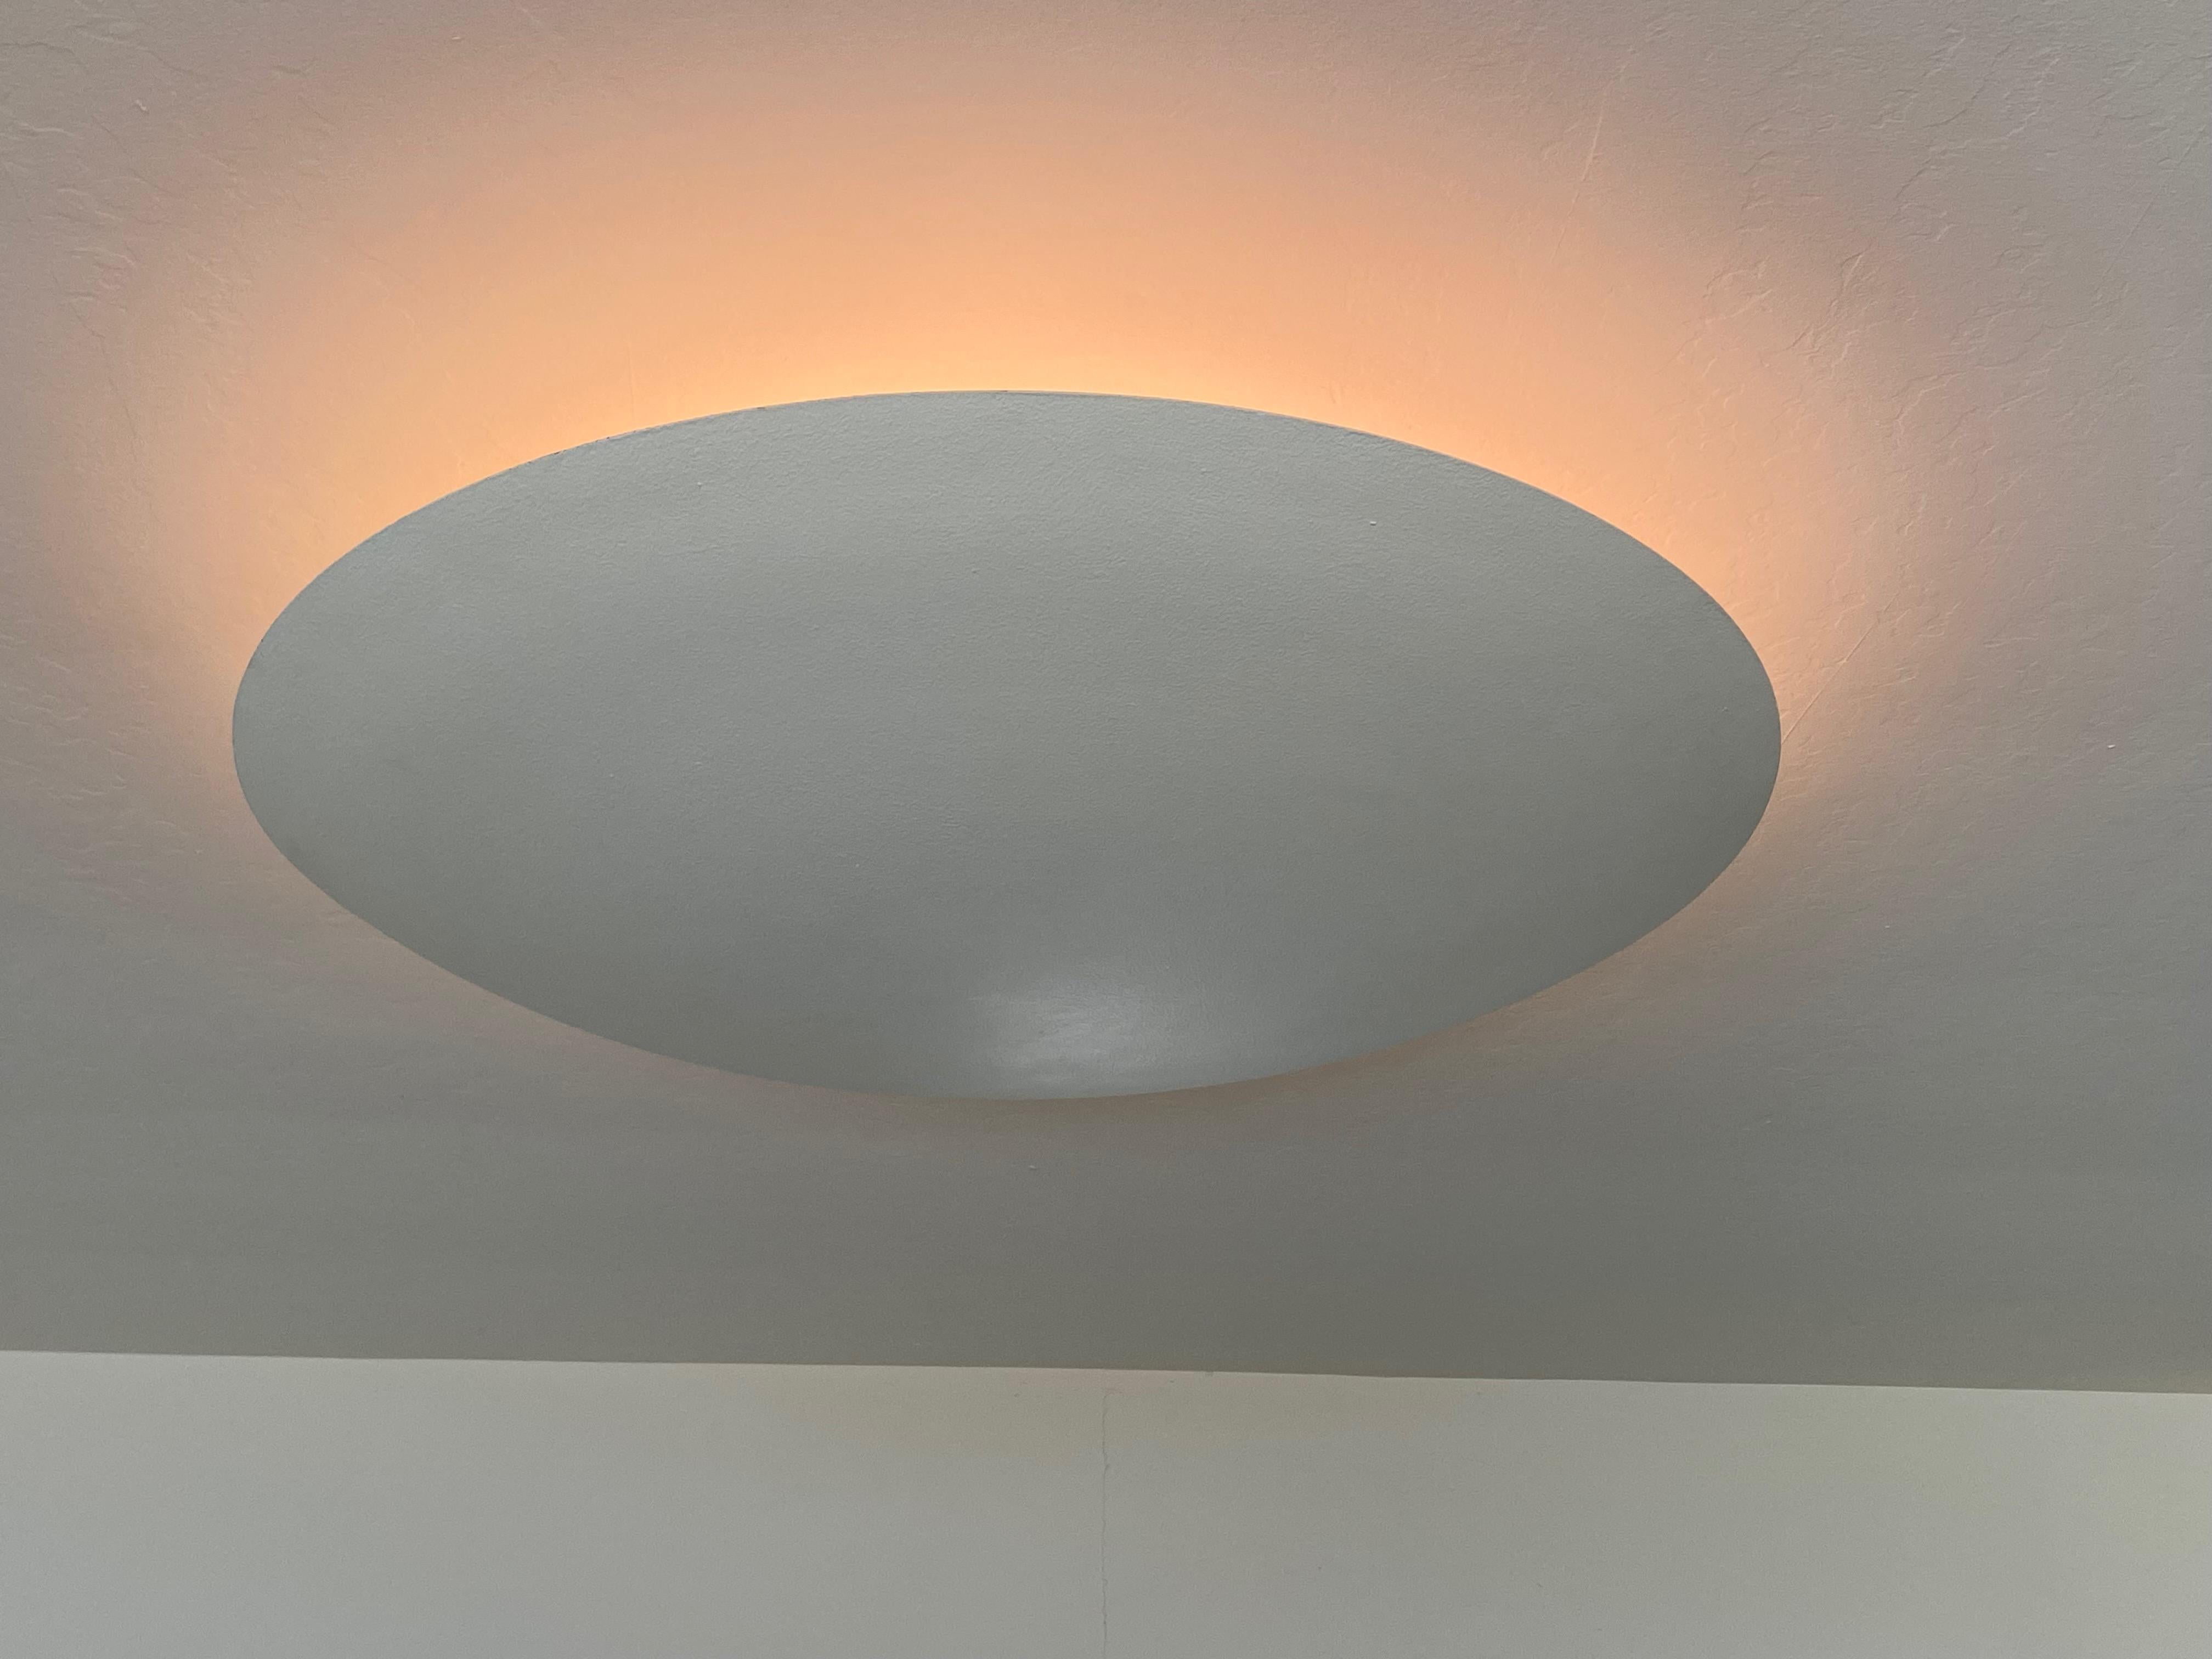 Ceiling saucer by San Francisco designers Esther & Gross Wood, who's work is the the permanent collection of the MoMA NY and were featured in the 